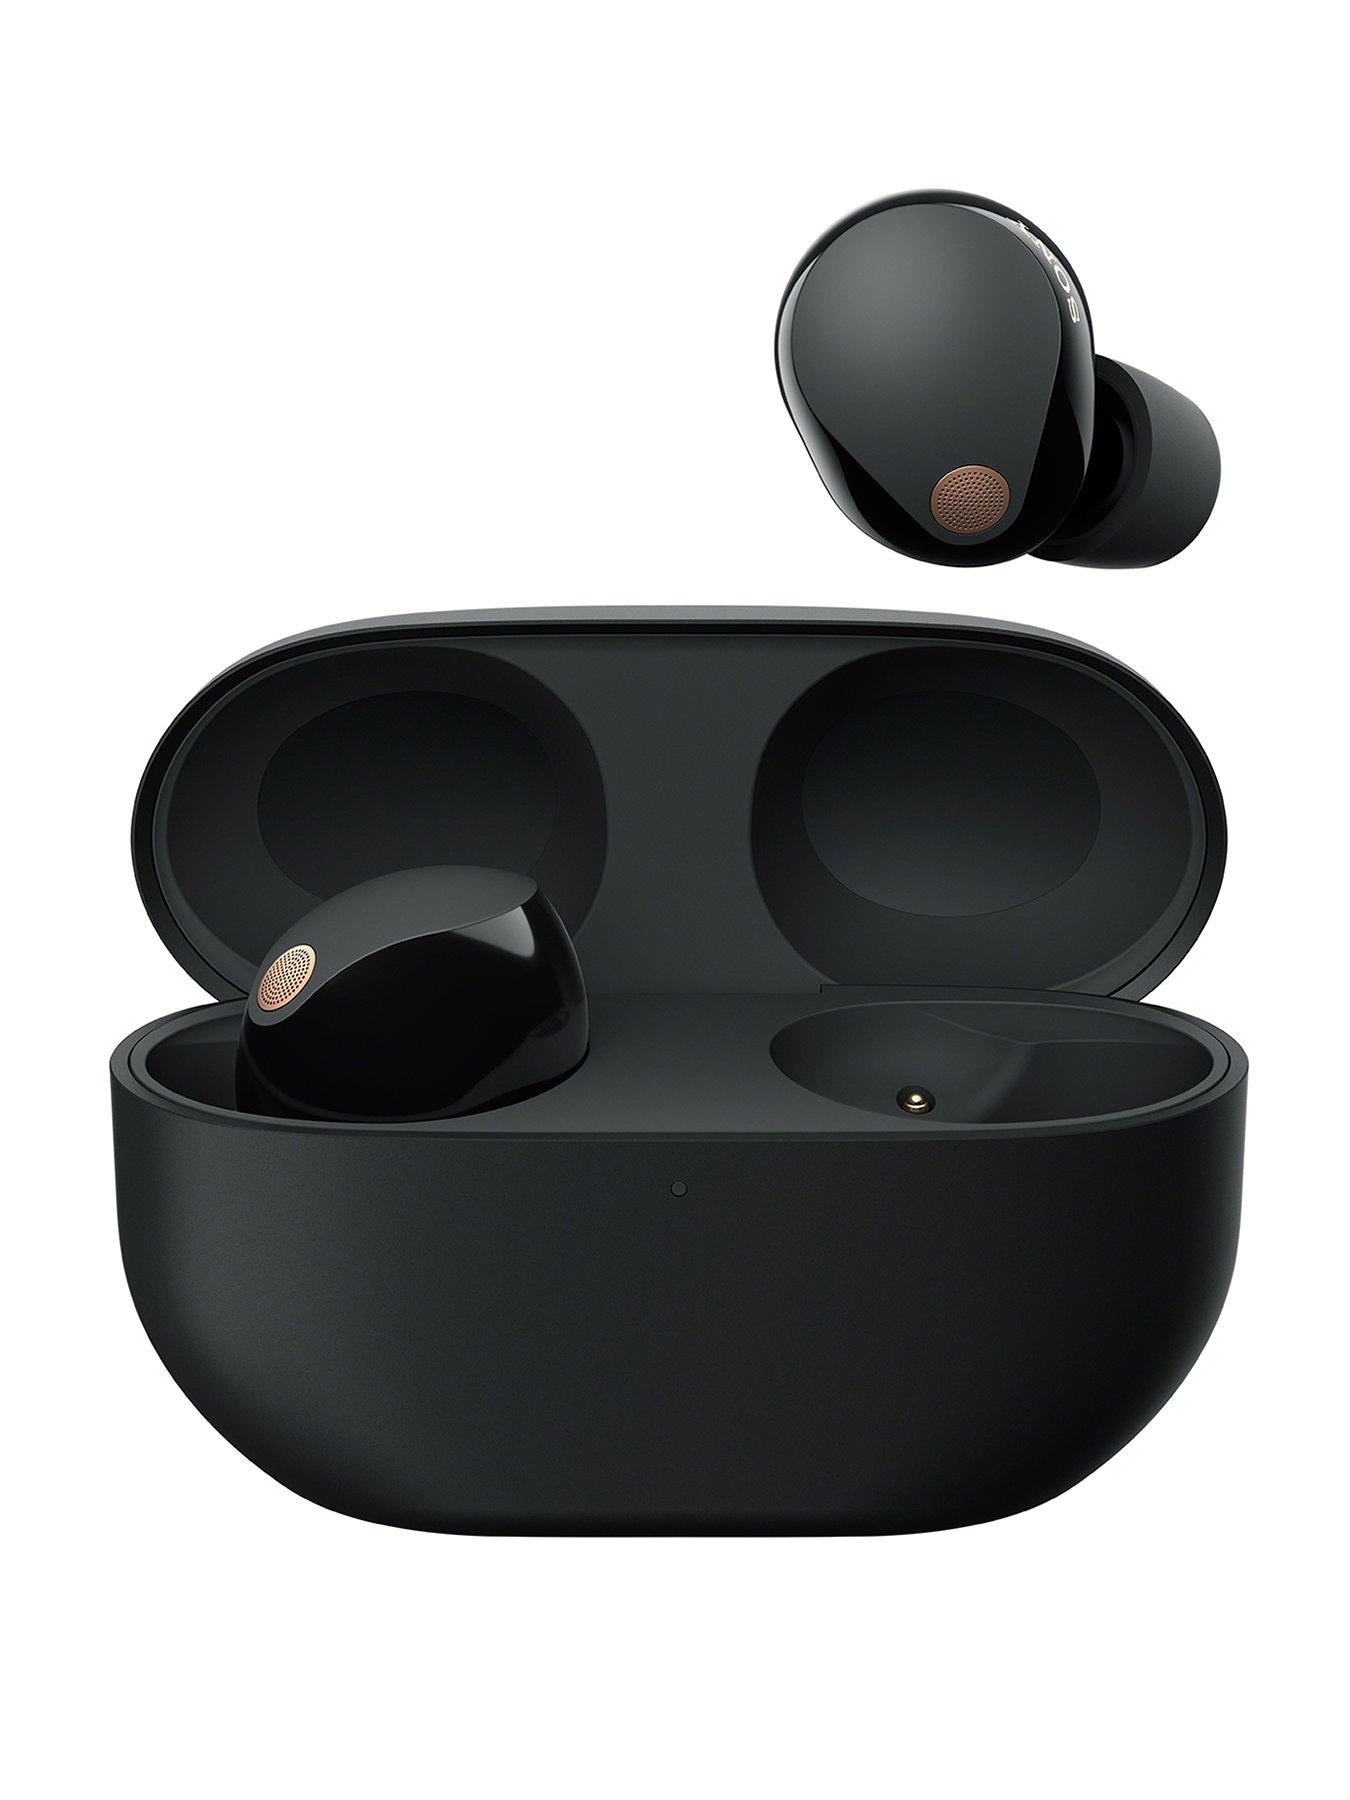 Sorry, but open wireless earbuds are stupid – here's why